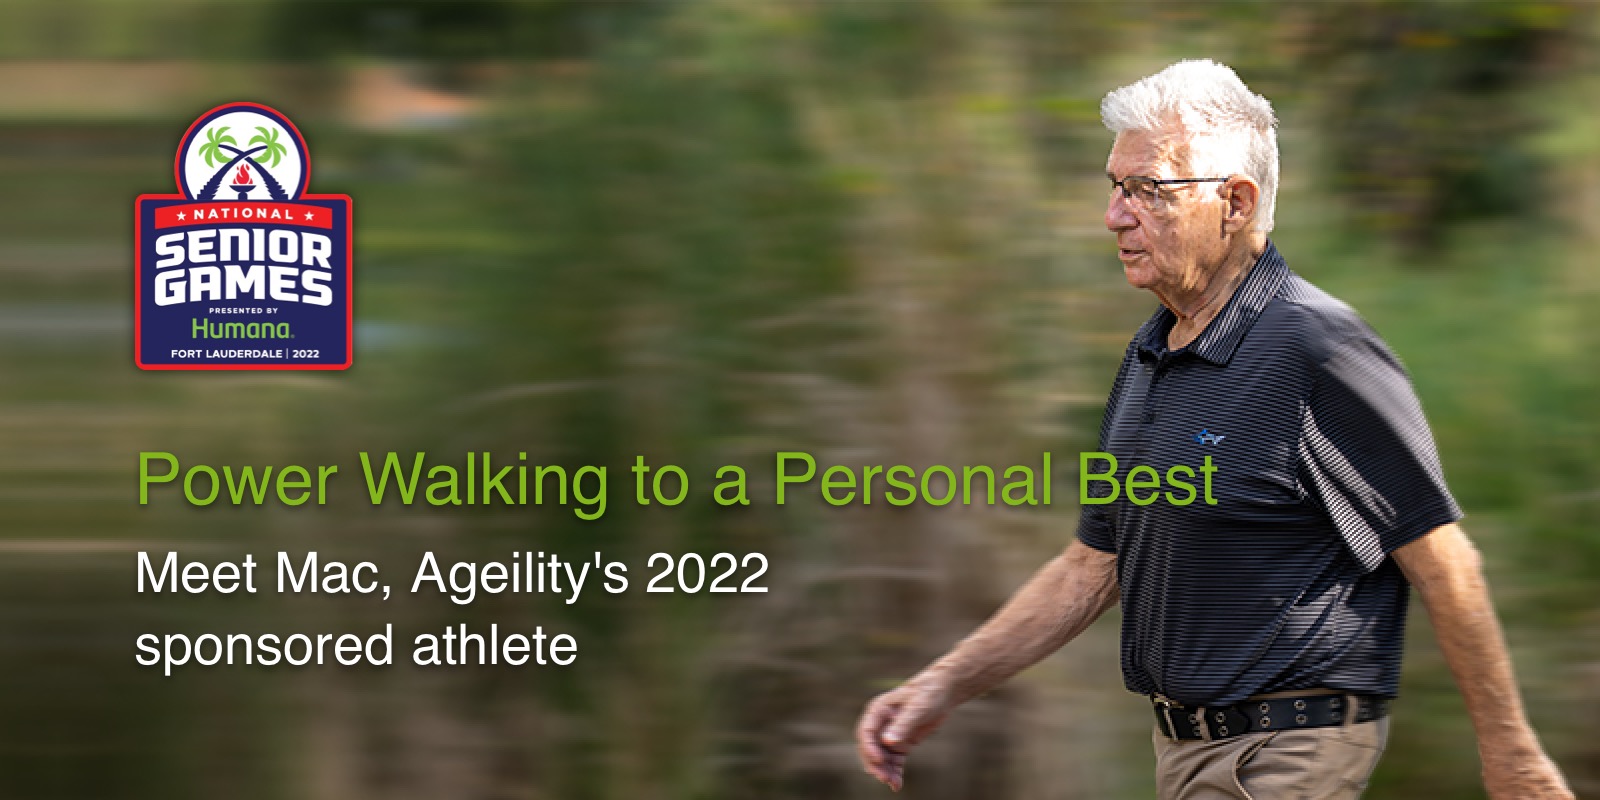 Power Walking to a Personal Best:  Meet Mac, Ageility's 2022 sponsored athlete